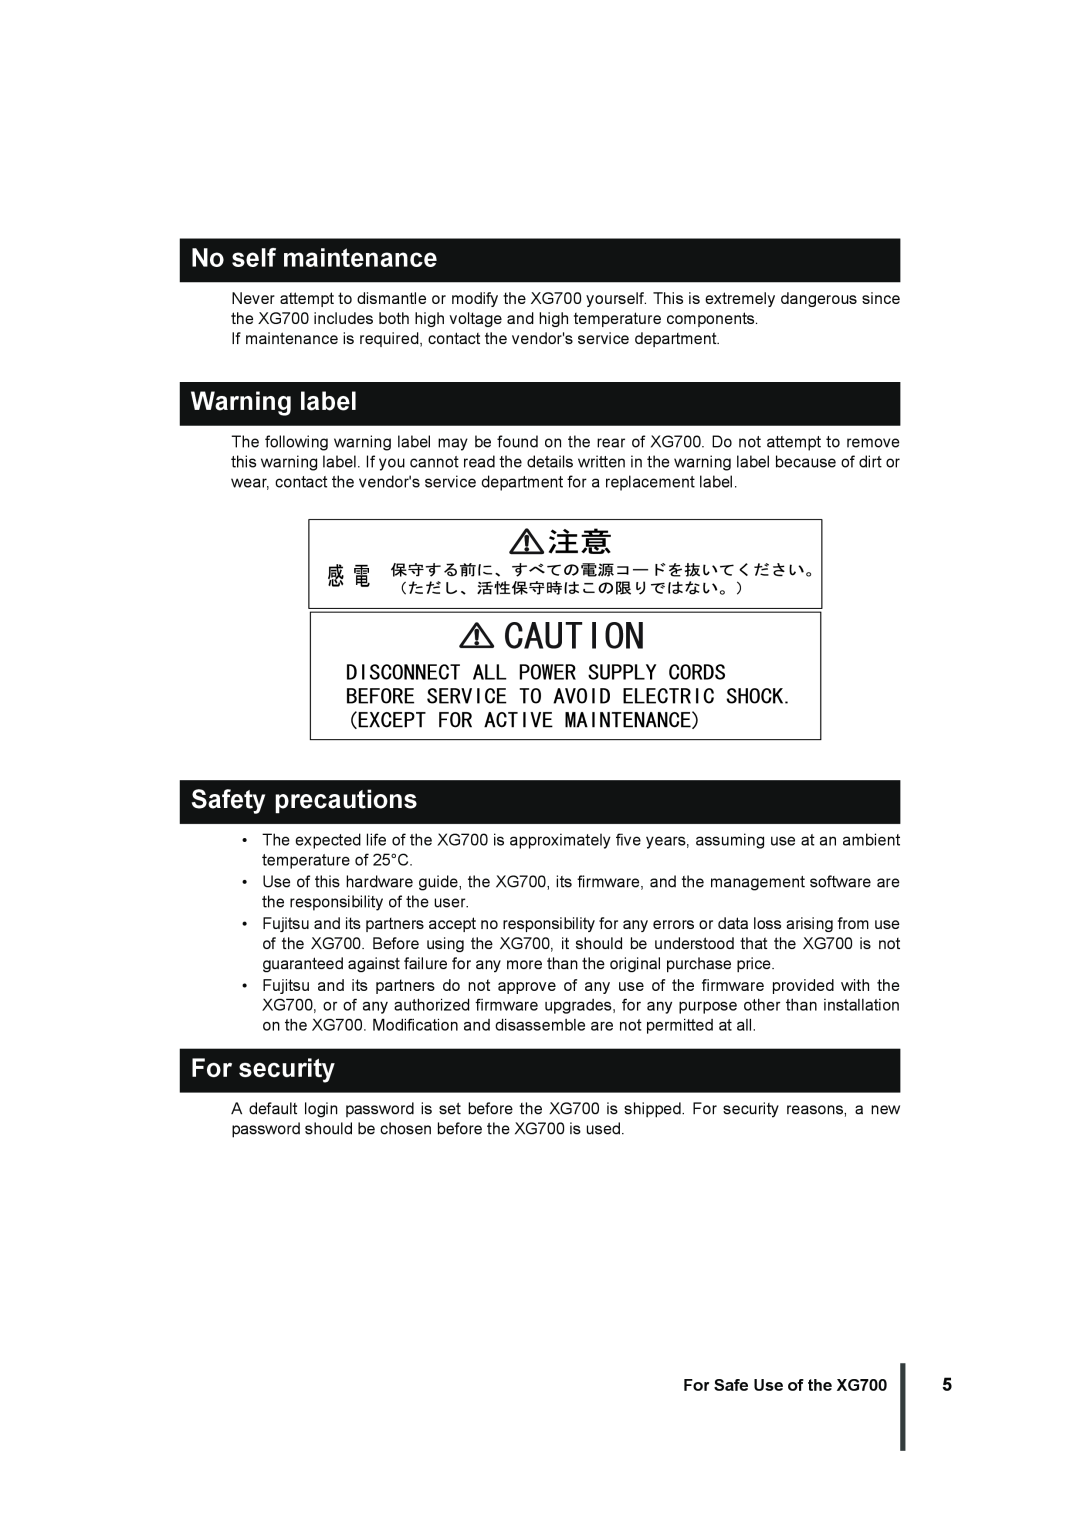 Fujitsu manual No self maintenance, Warning label, Safety precautions, For security, For Safe Use of the XG700 